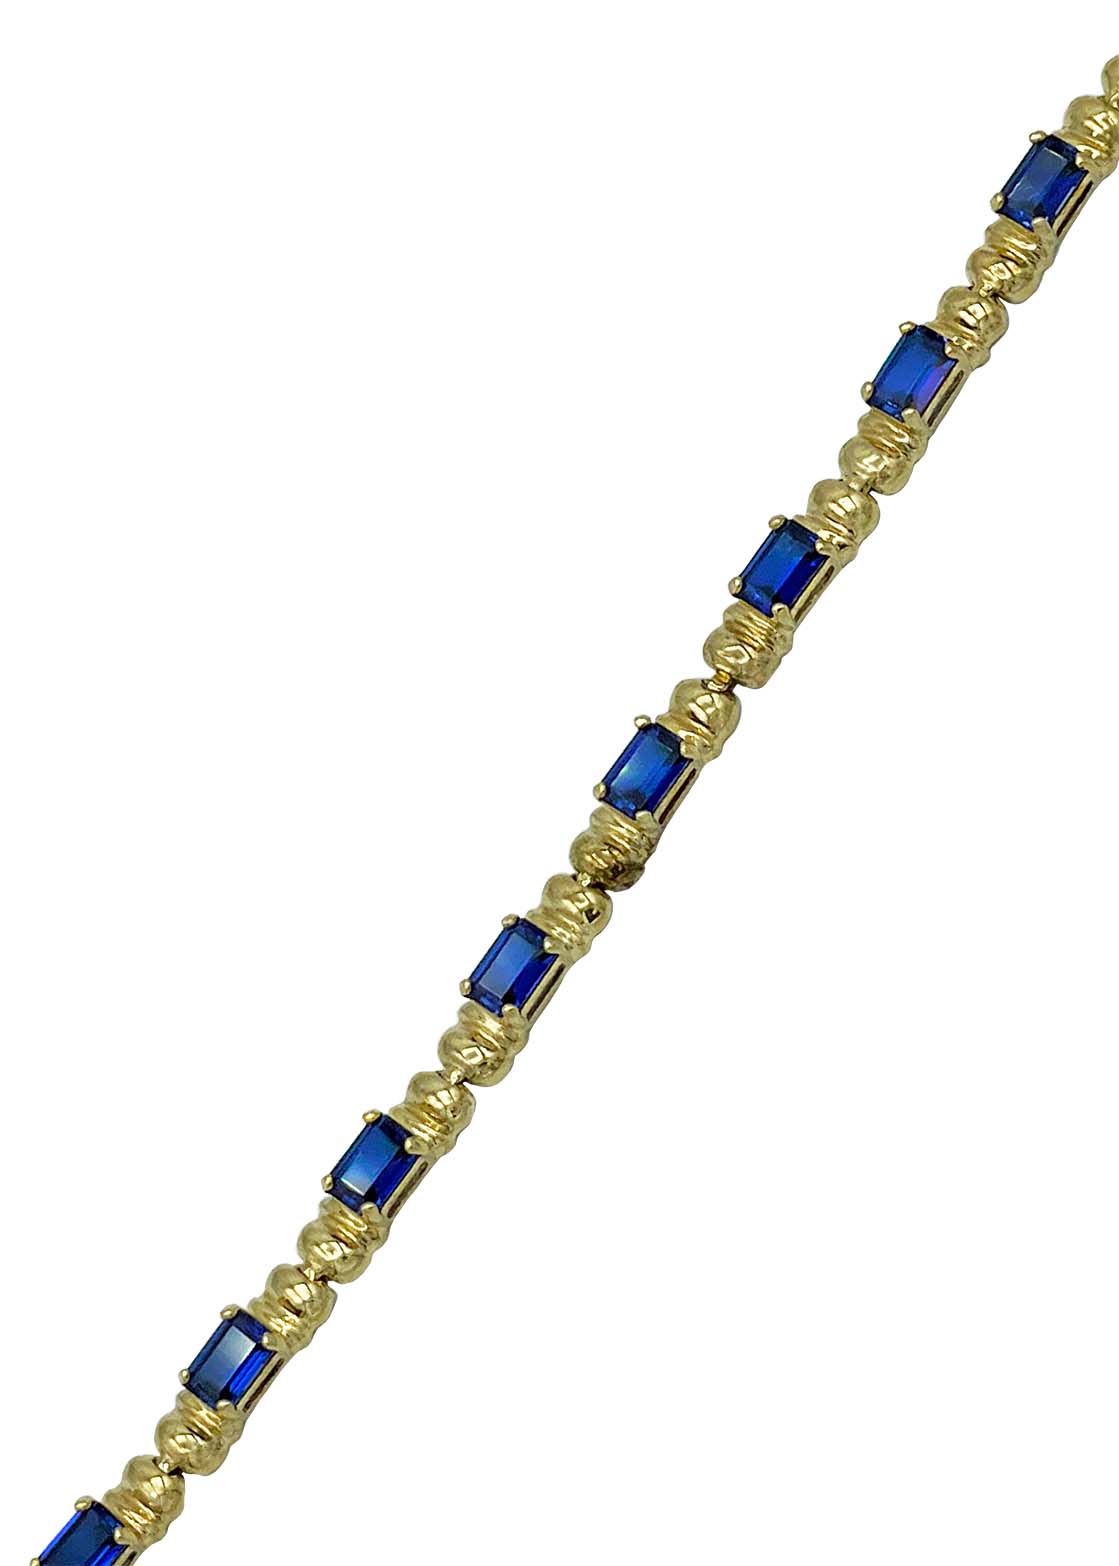 18k Yellow Gold Bracelet with Sapphires Image